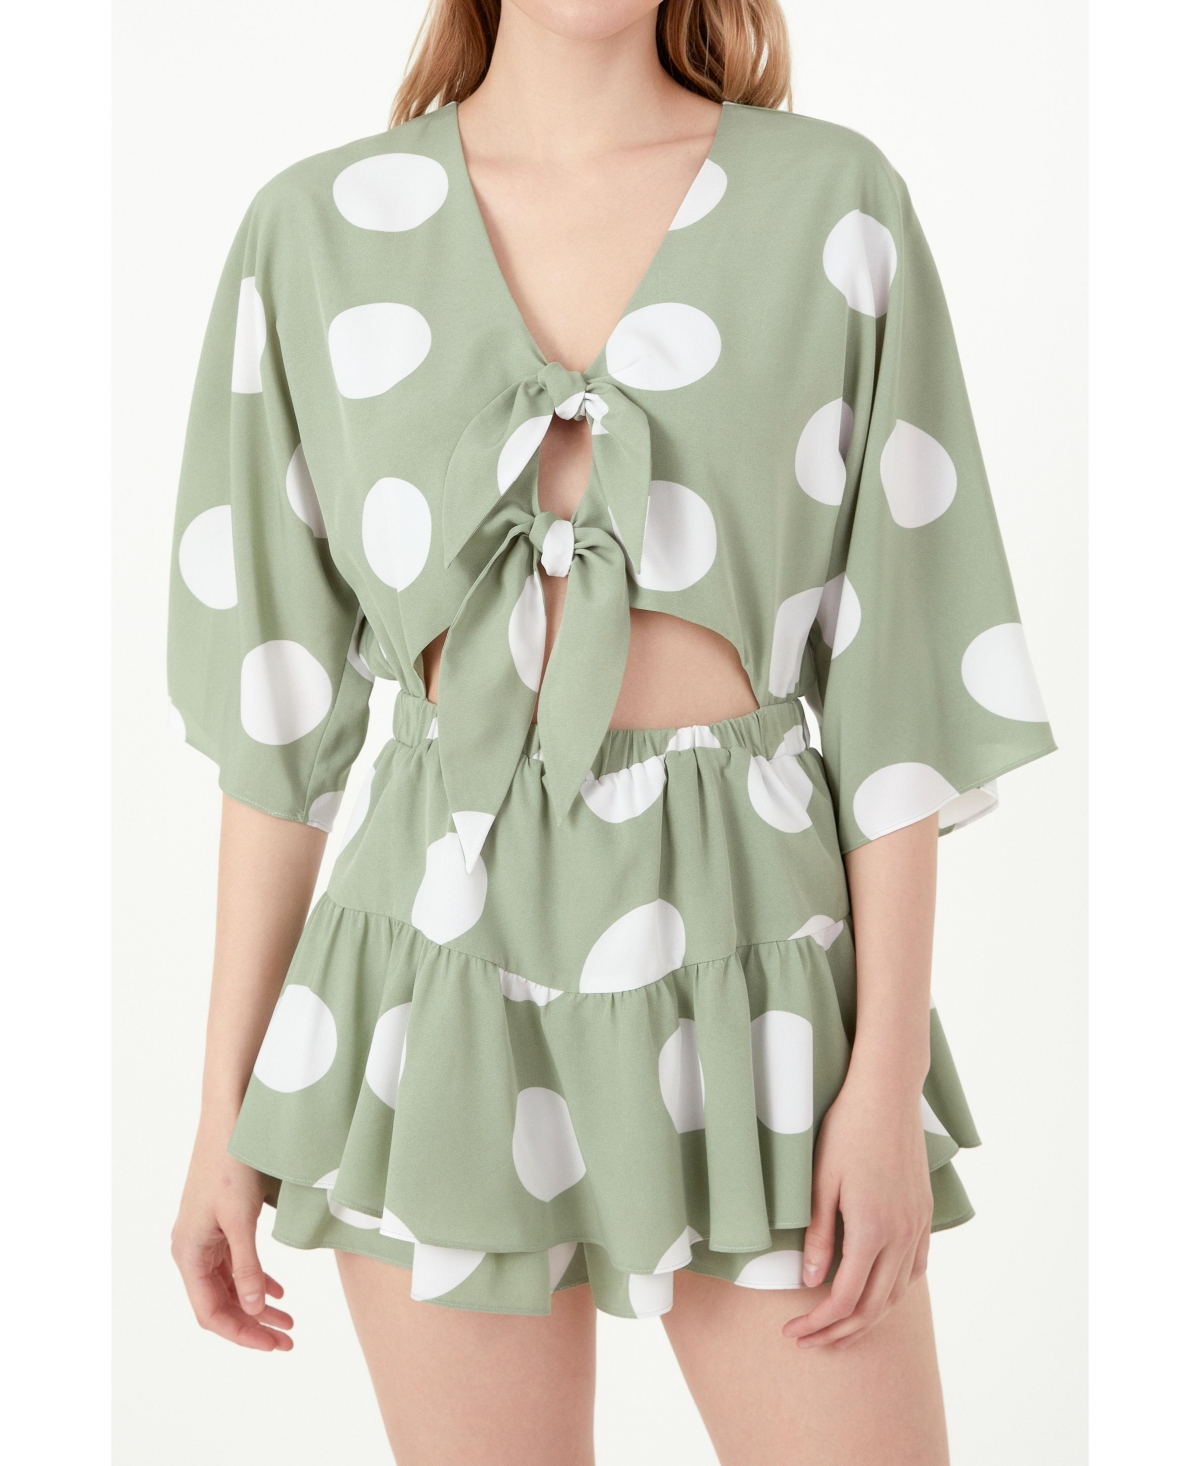 Women's Knotted Front Romper with Ruffle - Pistachio